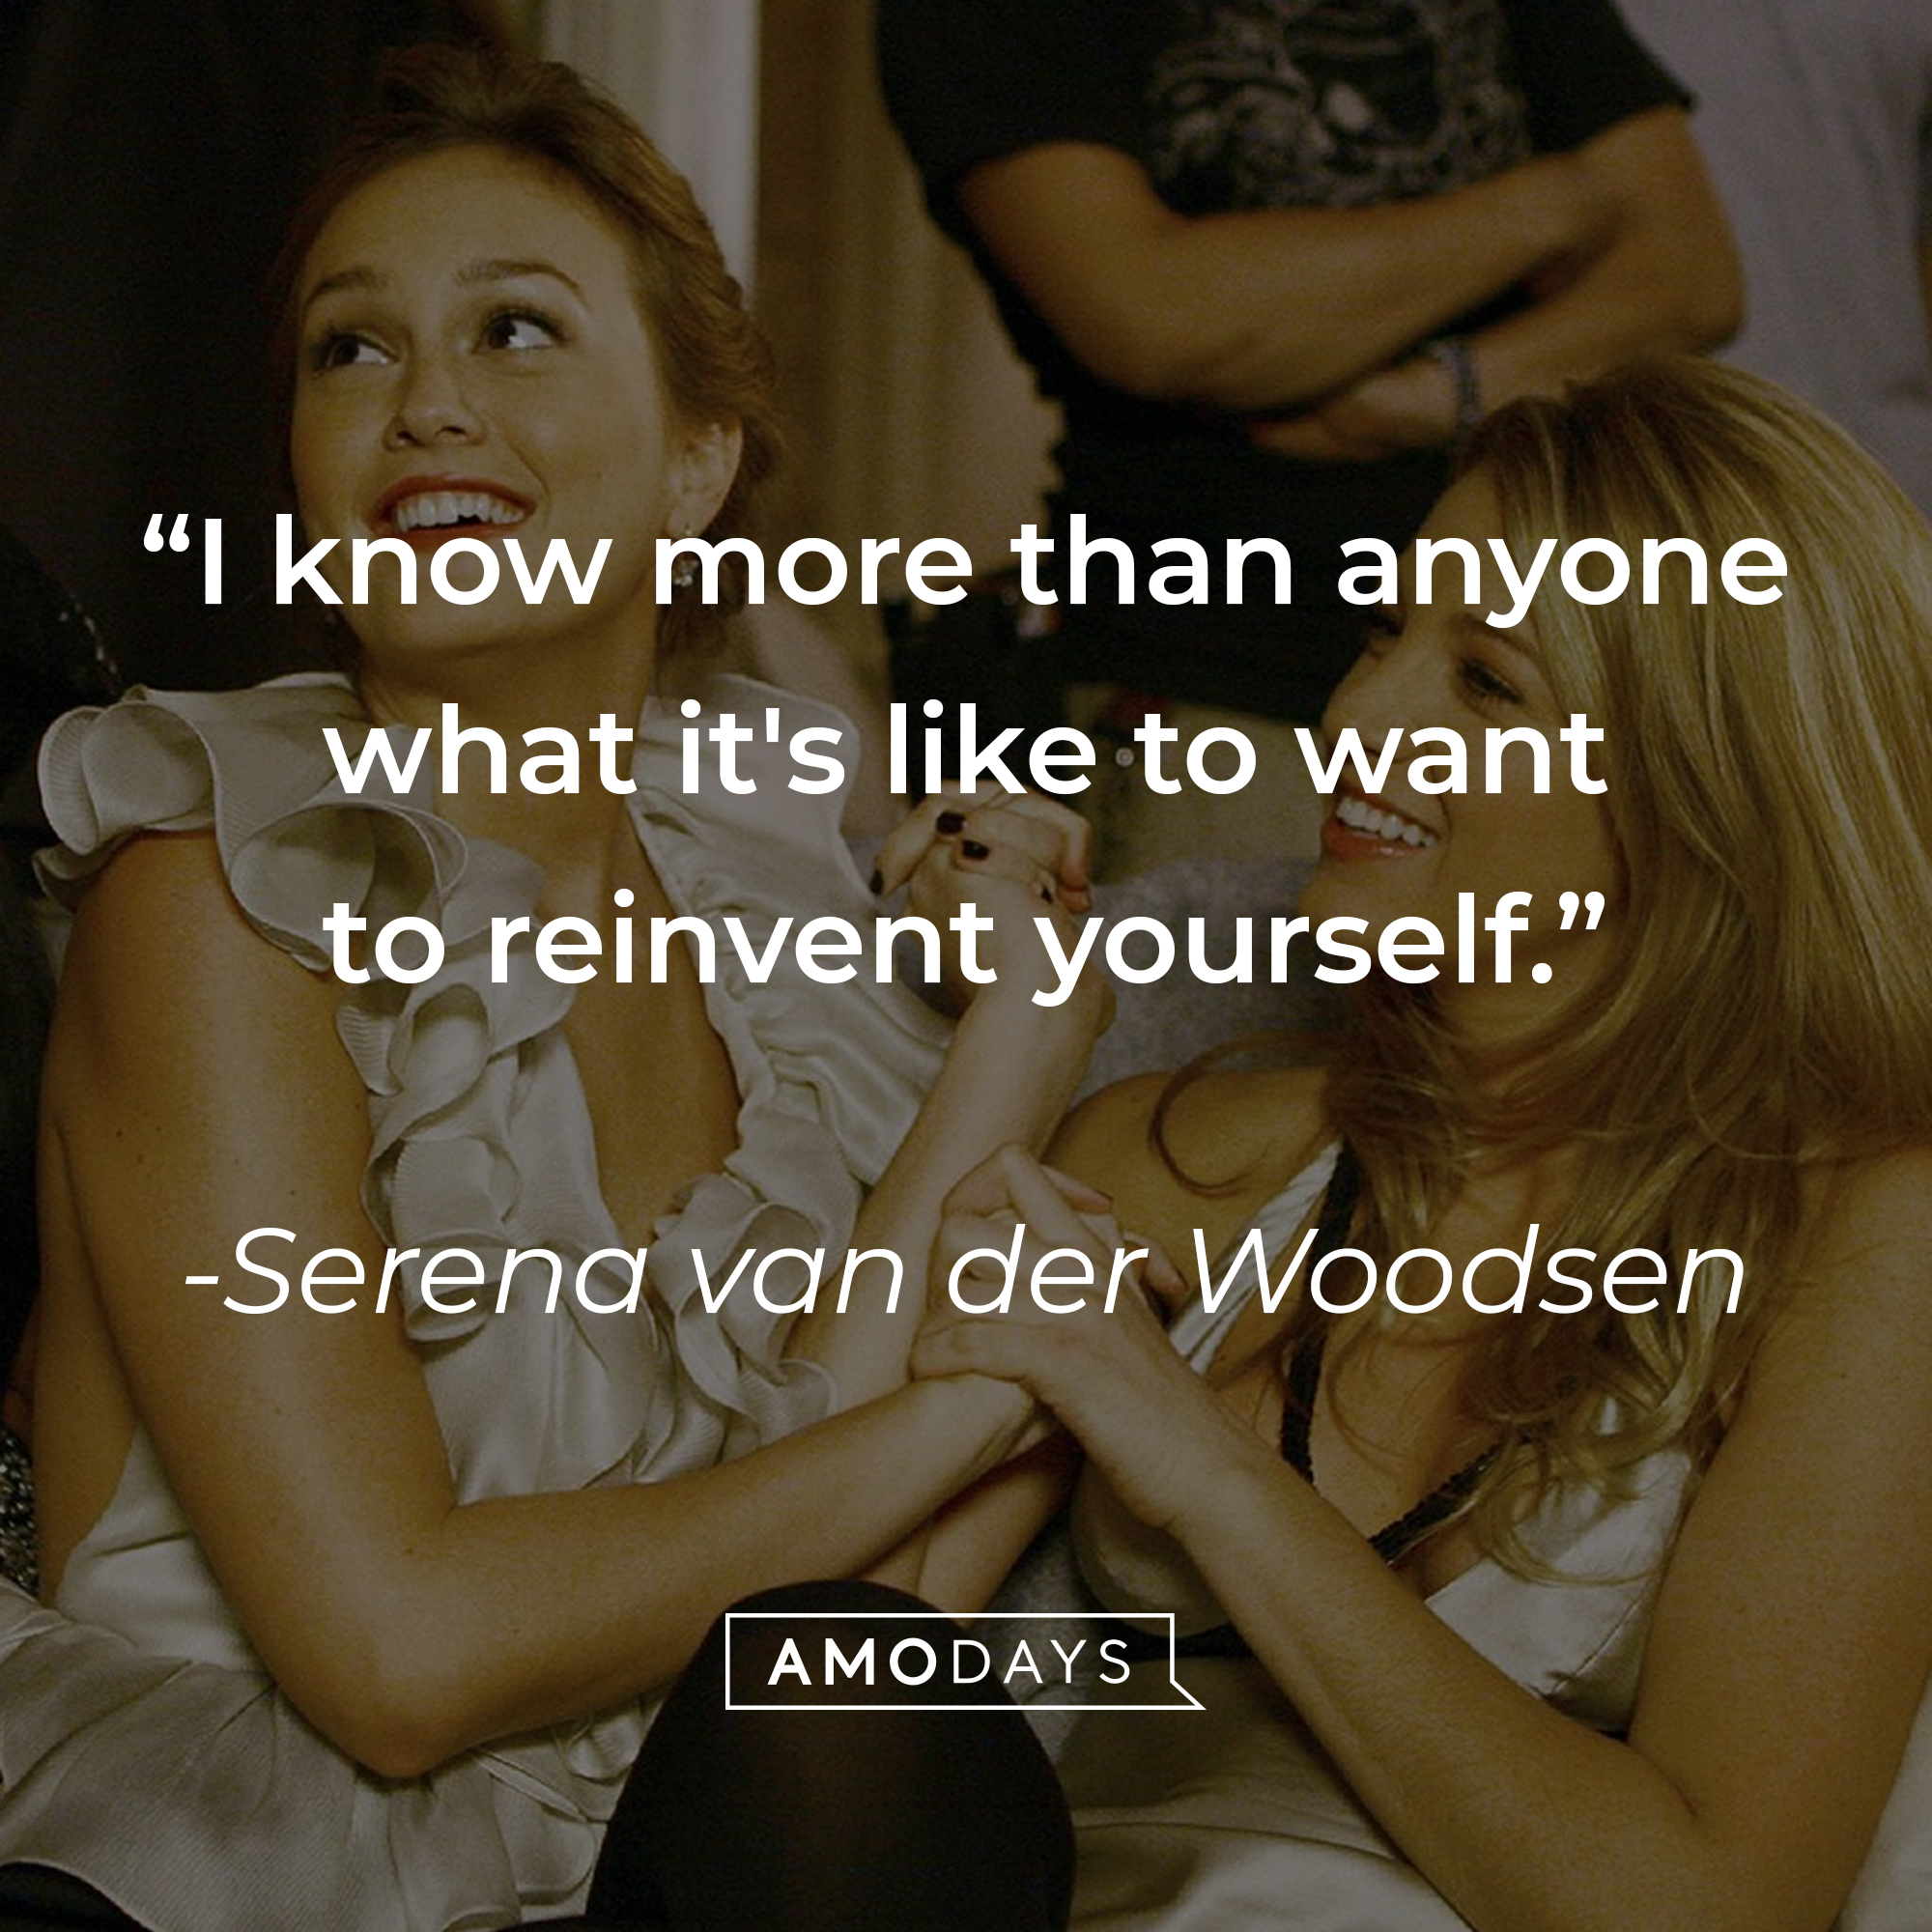 Image from "Gossip Girl" with Serena van der Woodsen's quote: "I know more than anyone what it's like to want to reinvent yourself." | Source: facebook.com/GossipGirl